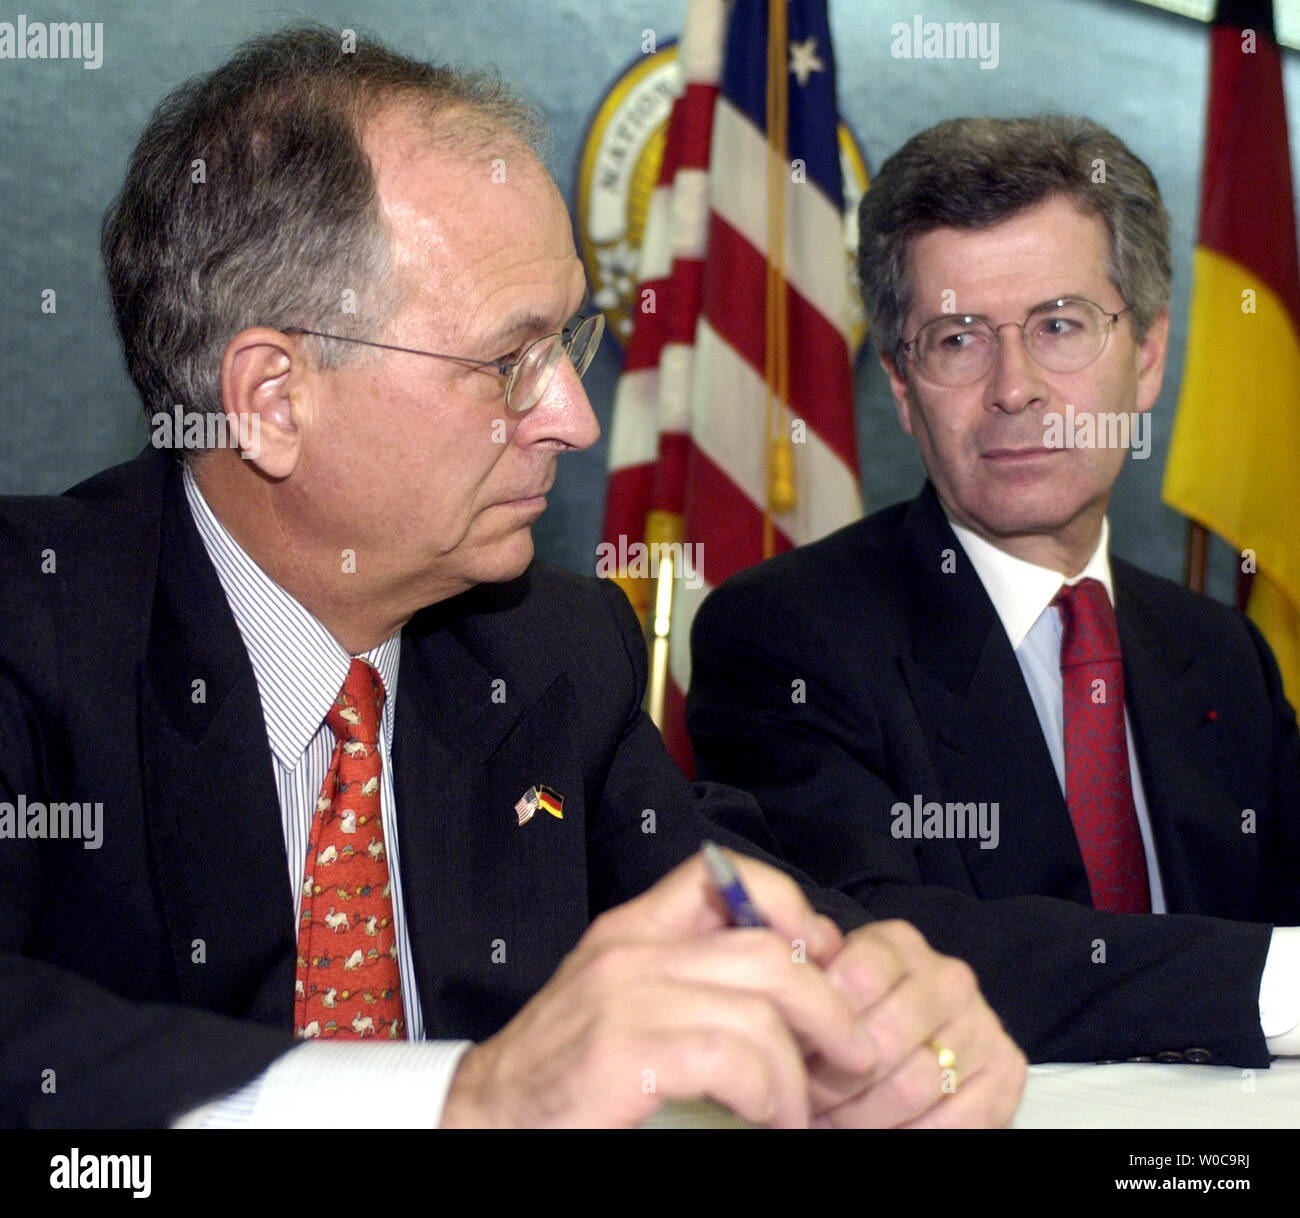 French Ambassador to the United States Jean David Levitte left, and German Ambassador to the United States Wolfgang Ischinger decide who will anwser the next question during an anouncement of a new program between the United States, France and Germany at the National Press Club on December 12, 2003 in Washington.  Both gentlemen tried to avoid questions regarding the decision by the United States to keep companies from their countries from gaining  contracts in Iraq. (UPI Photo/Michael Kleinfeld) Stock Photo